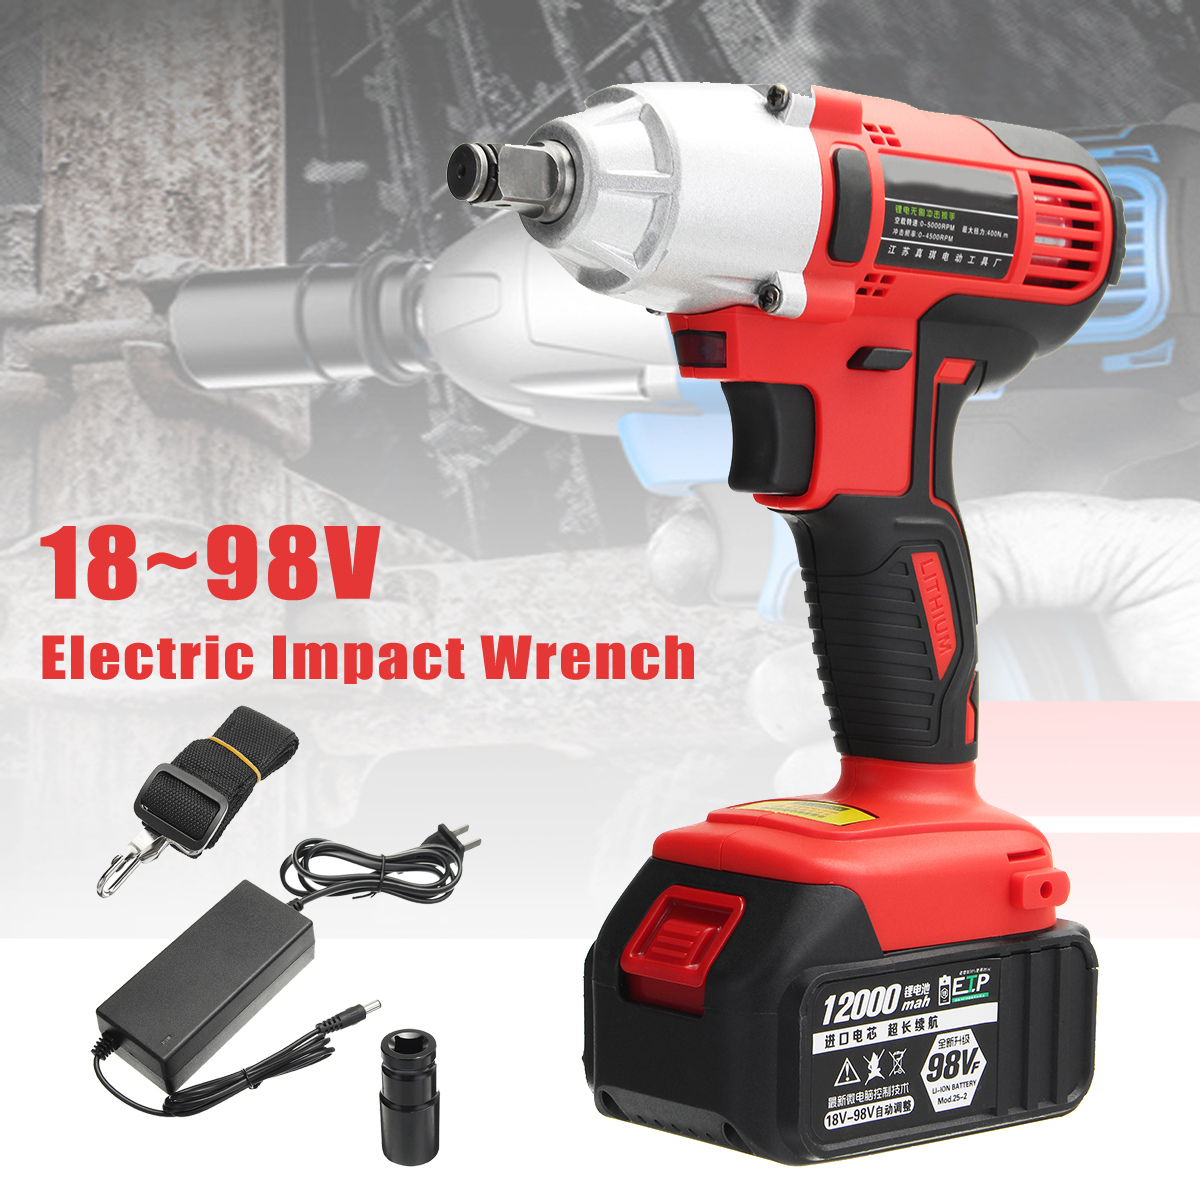 Electric-Wrench-98V-Lithium-Ion-Cordless-Impact-Wrench-Brushless-Motor-Power-Wrench-Tools-1310565-1